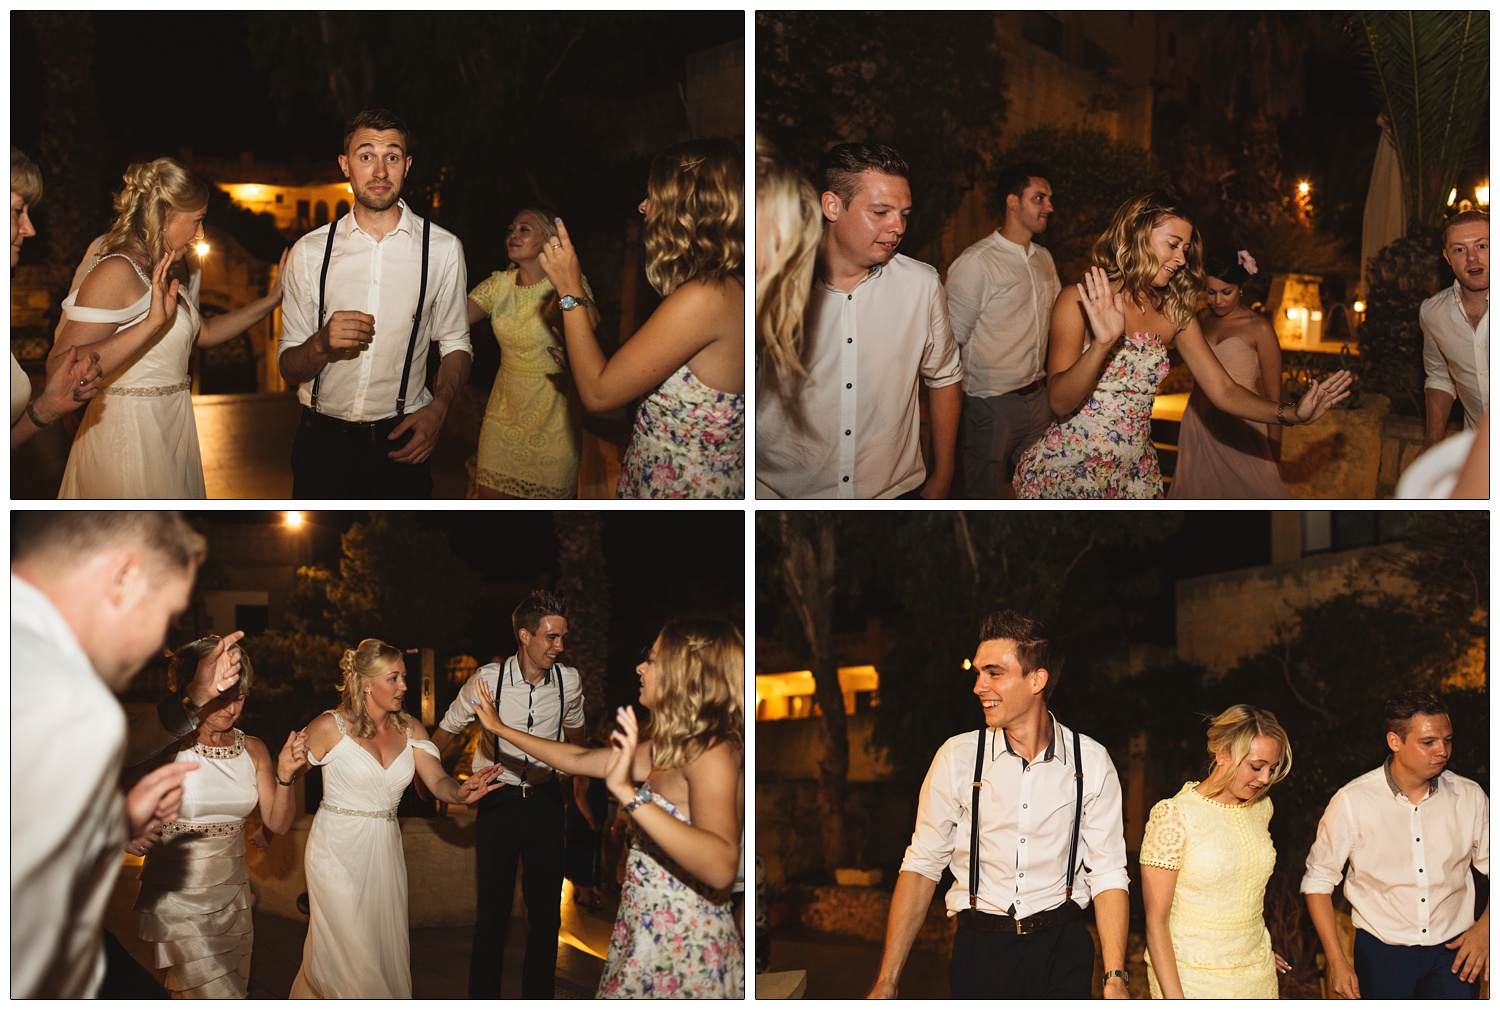 Wedding guests dancing outside at night with bride